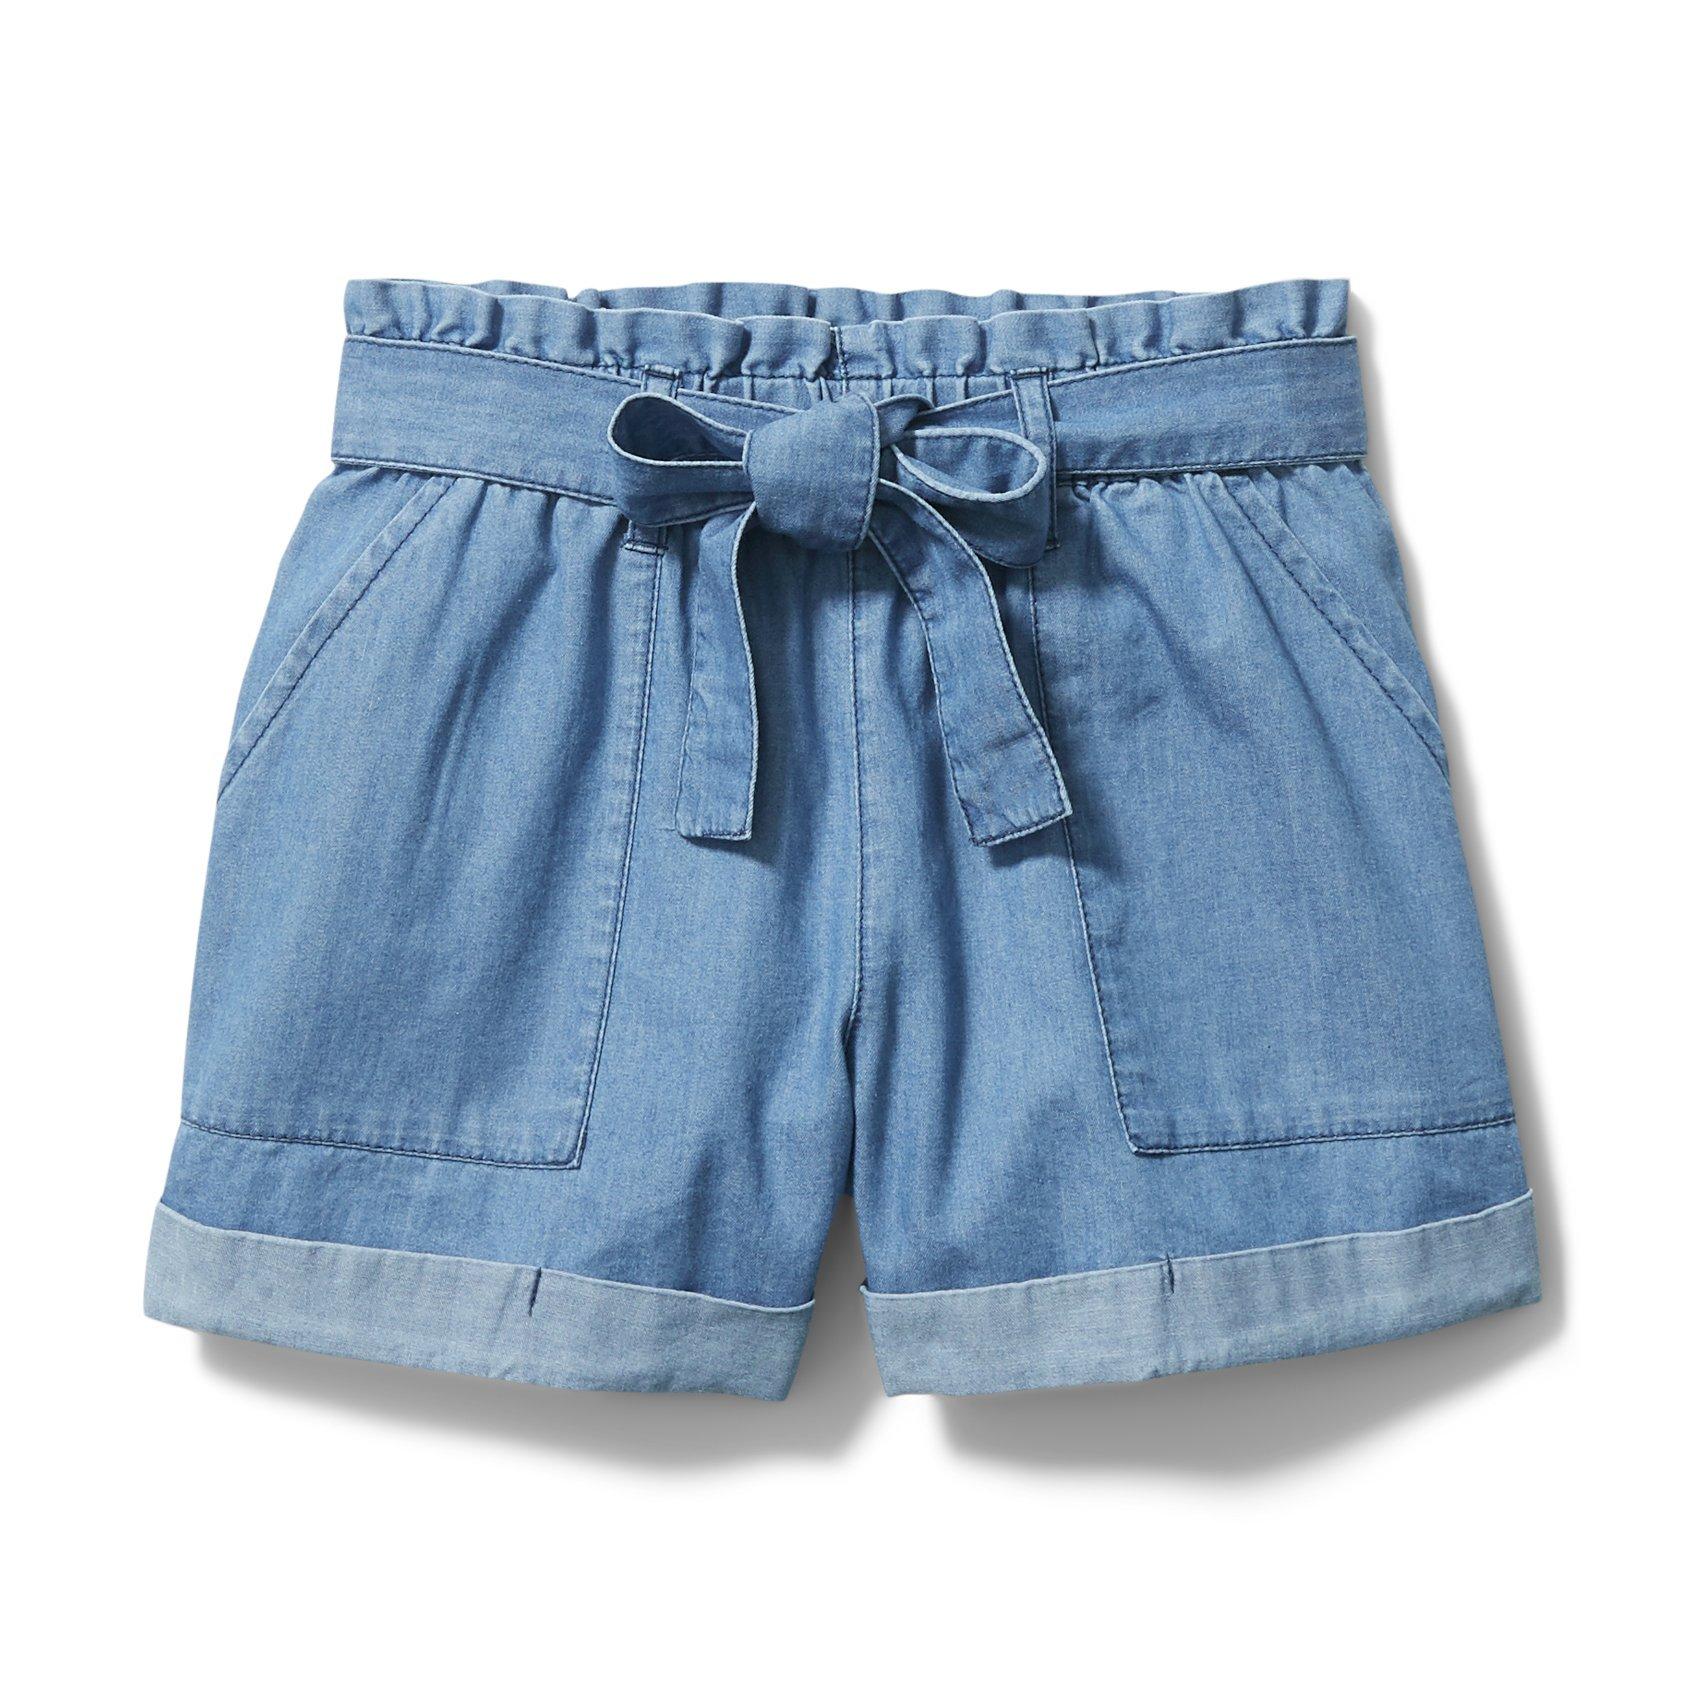 Tween Carolina Blue Chambray Belted Short by Janie and Jack